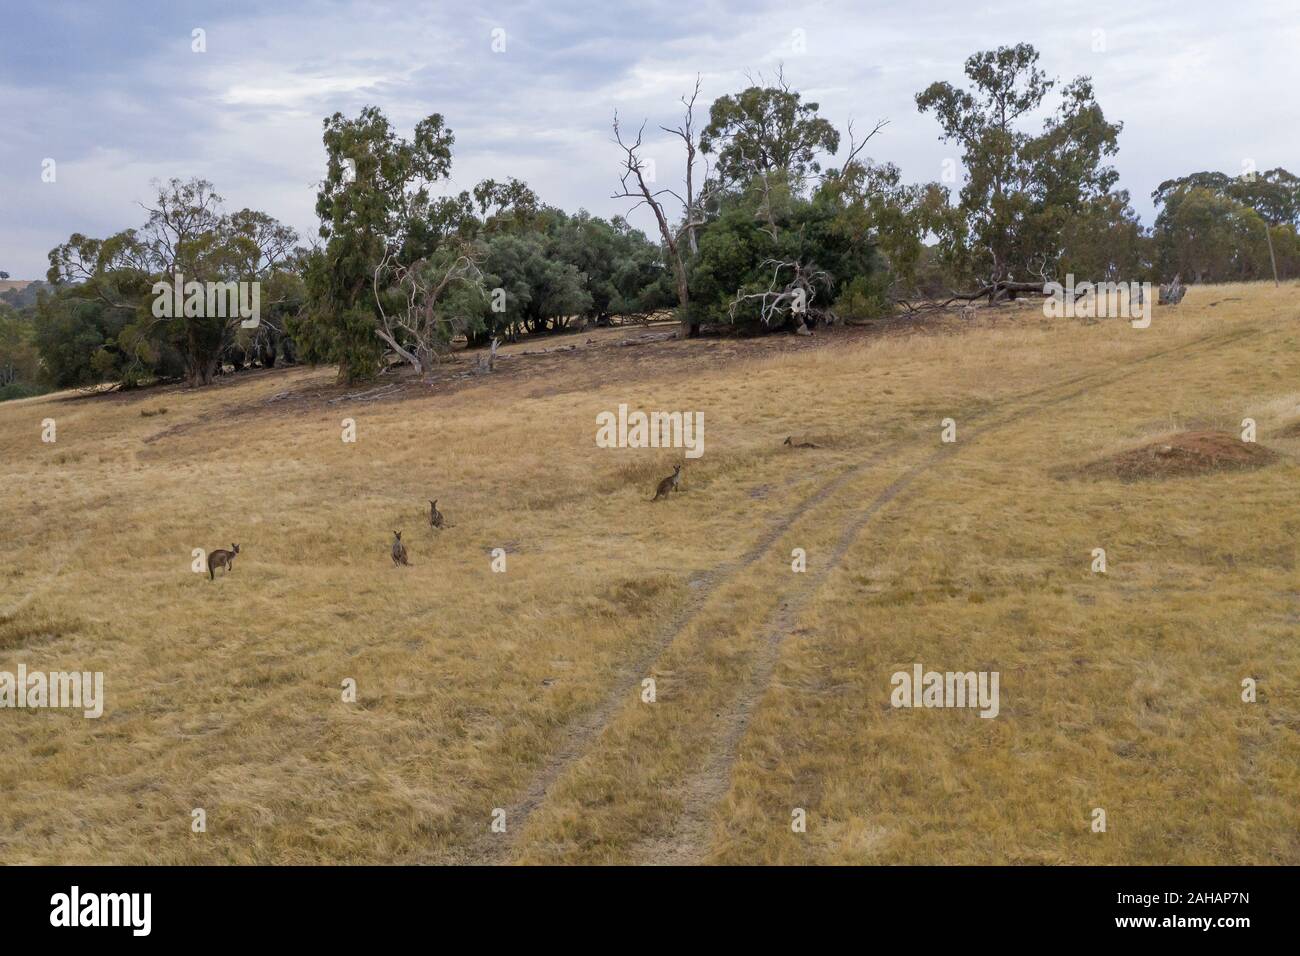 A small mob of Kangaroos on dry brown grass in the Australian outback Stock Photo